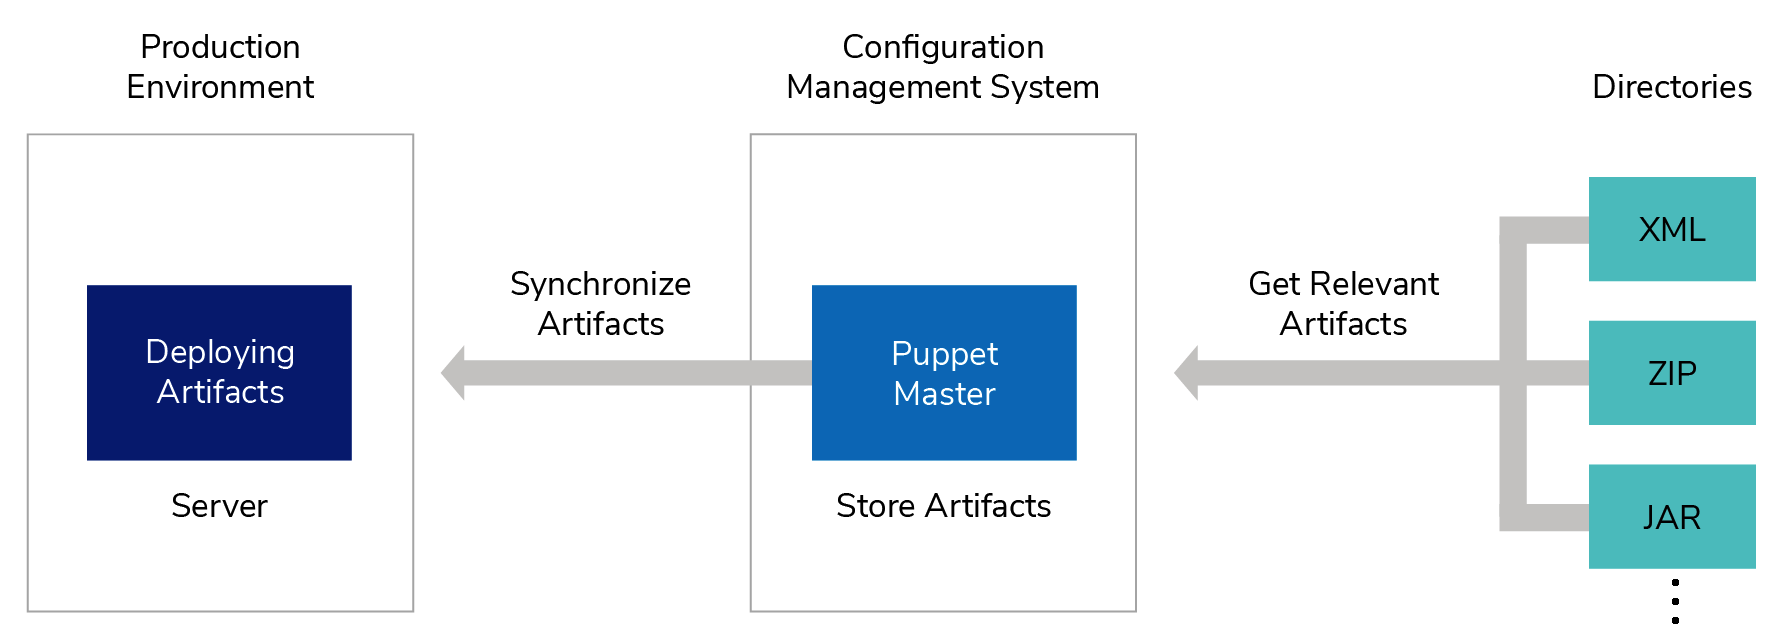 managing your artifacts using a configuration management system